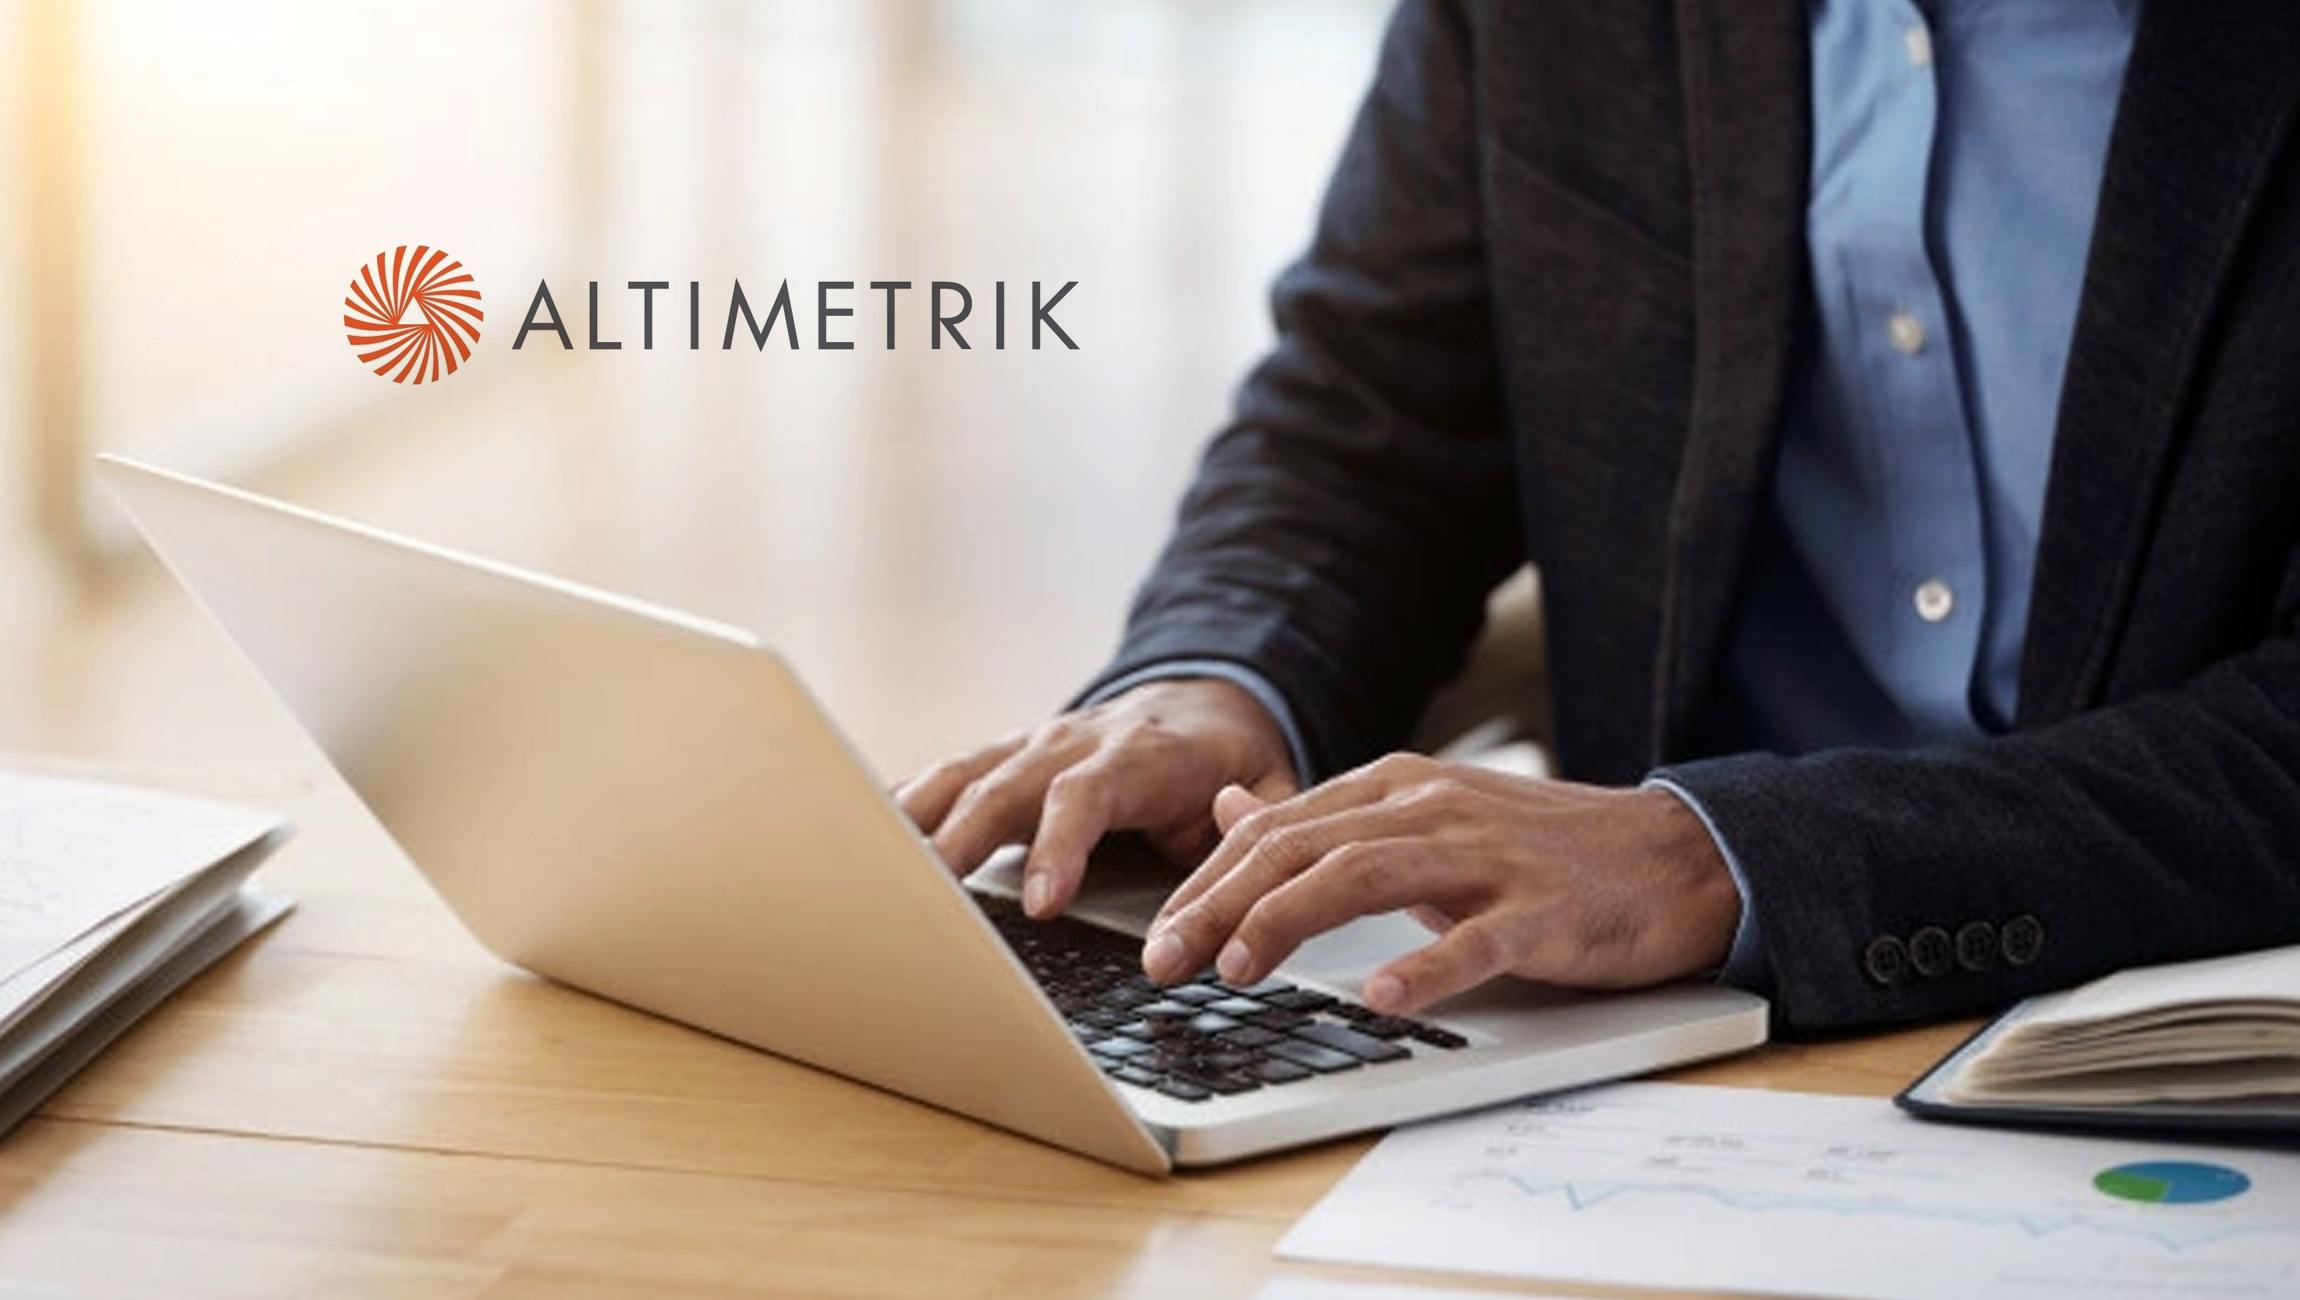 Altimetrik-Ranked-15th-Among-Industry’s-Biggest-Players-On-The-Software-Report’s-Annual-Top-100-Software-Companies-List